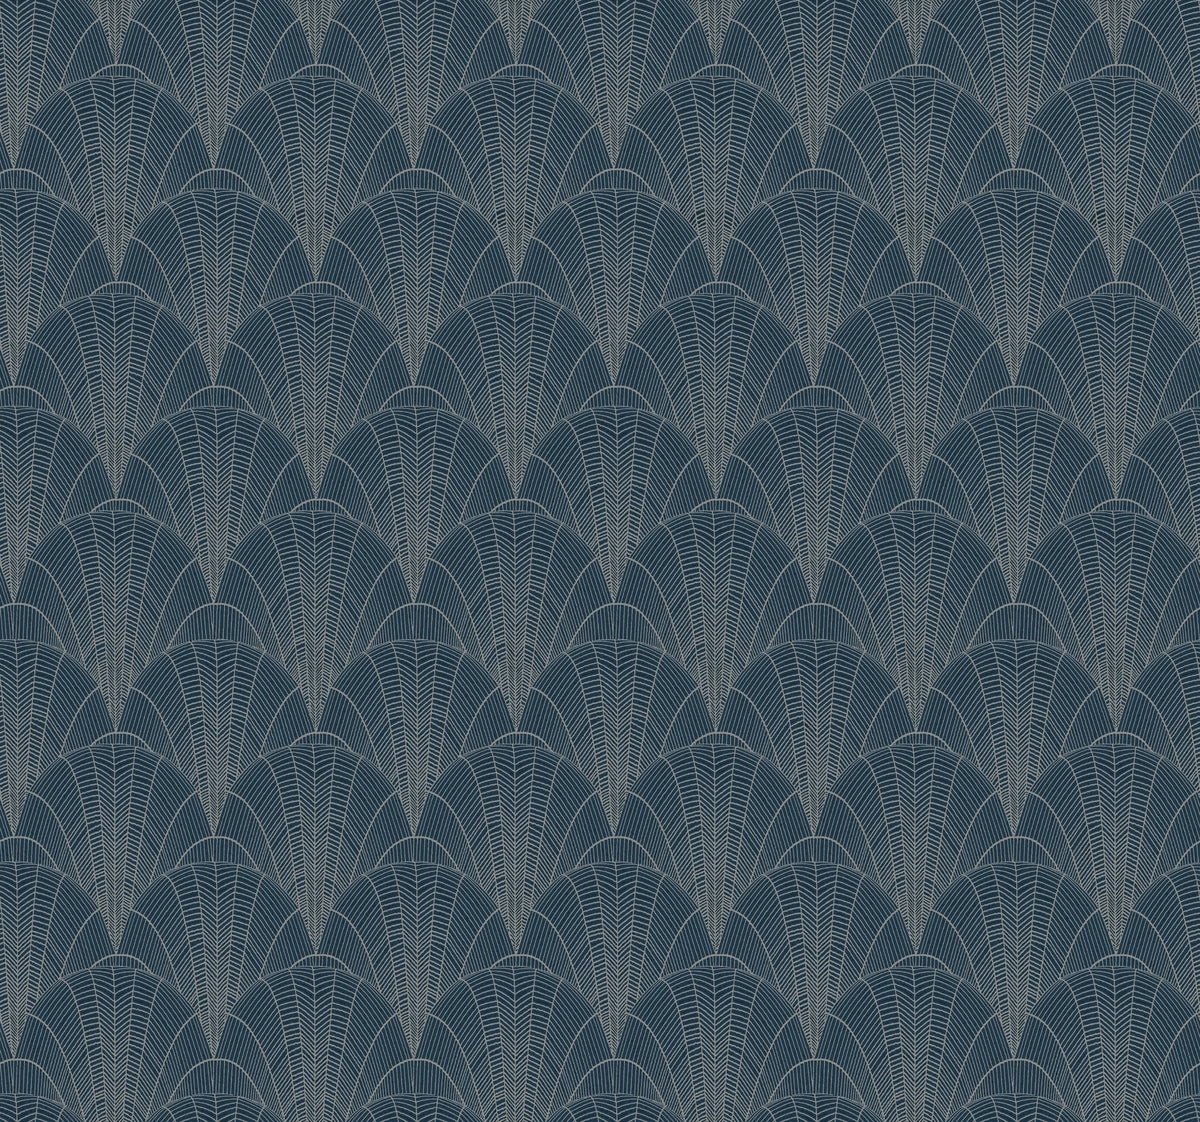 Modern Heritage Scalloped Pearls Wallpaper - SAMPLE ONLY